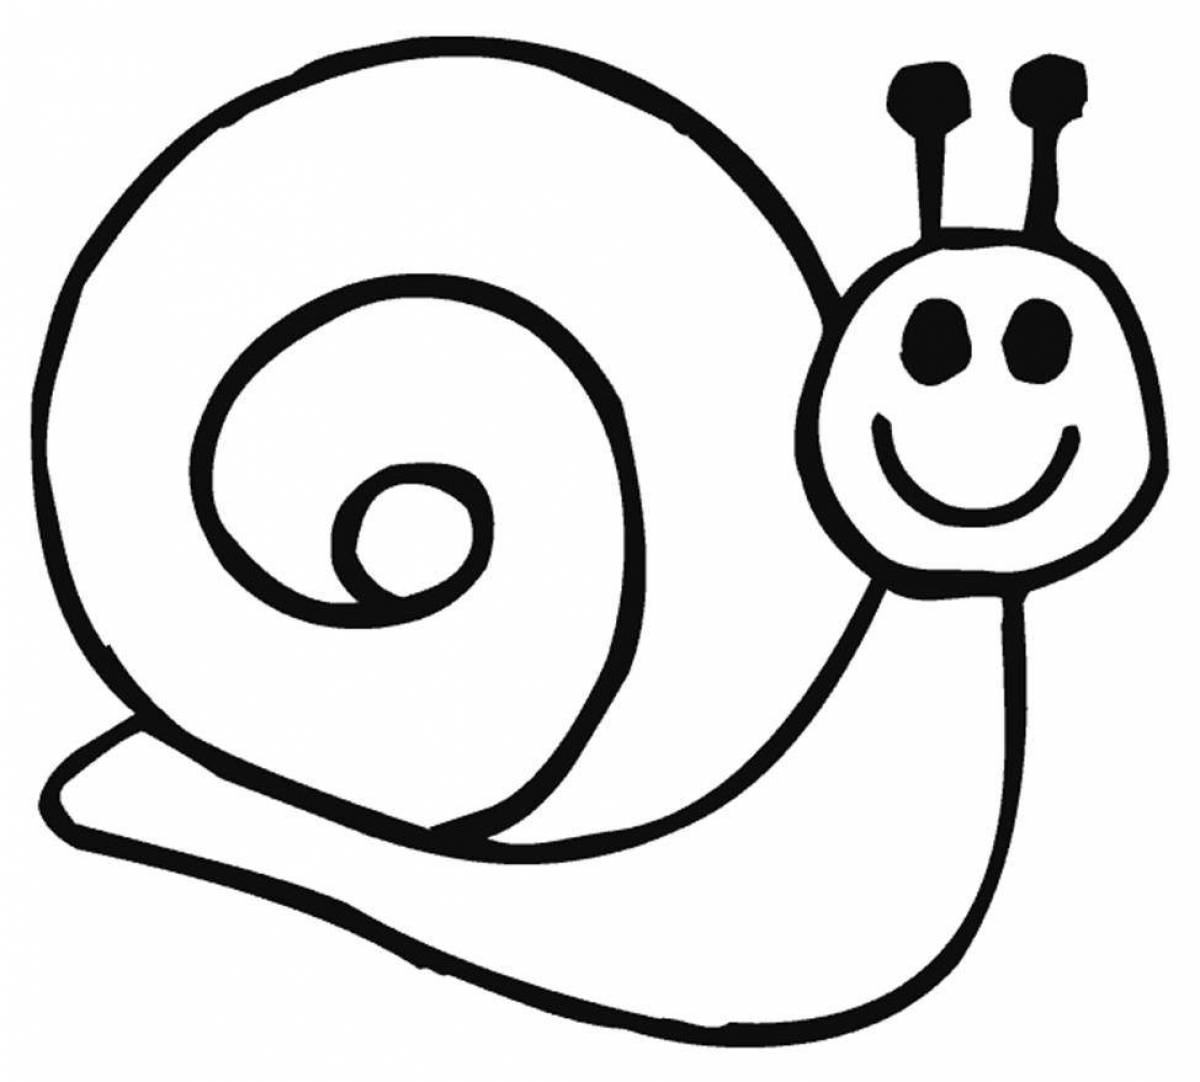 Snail live color drawing for children